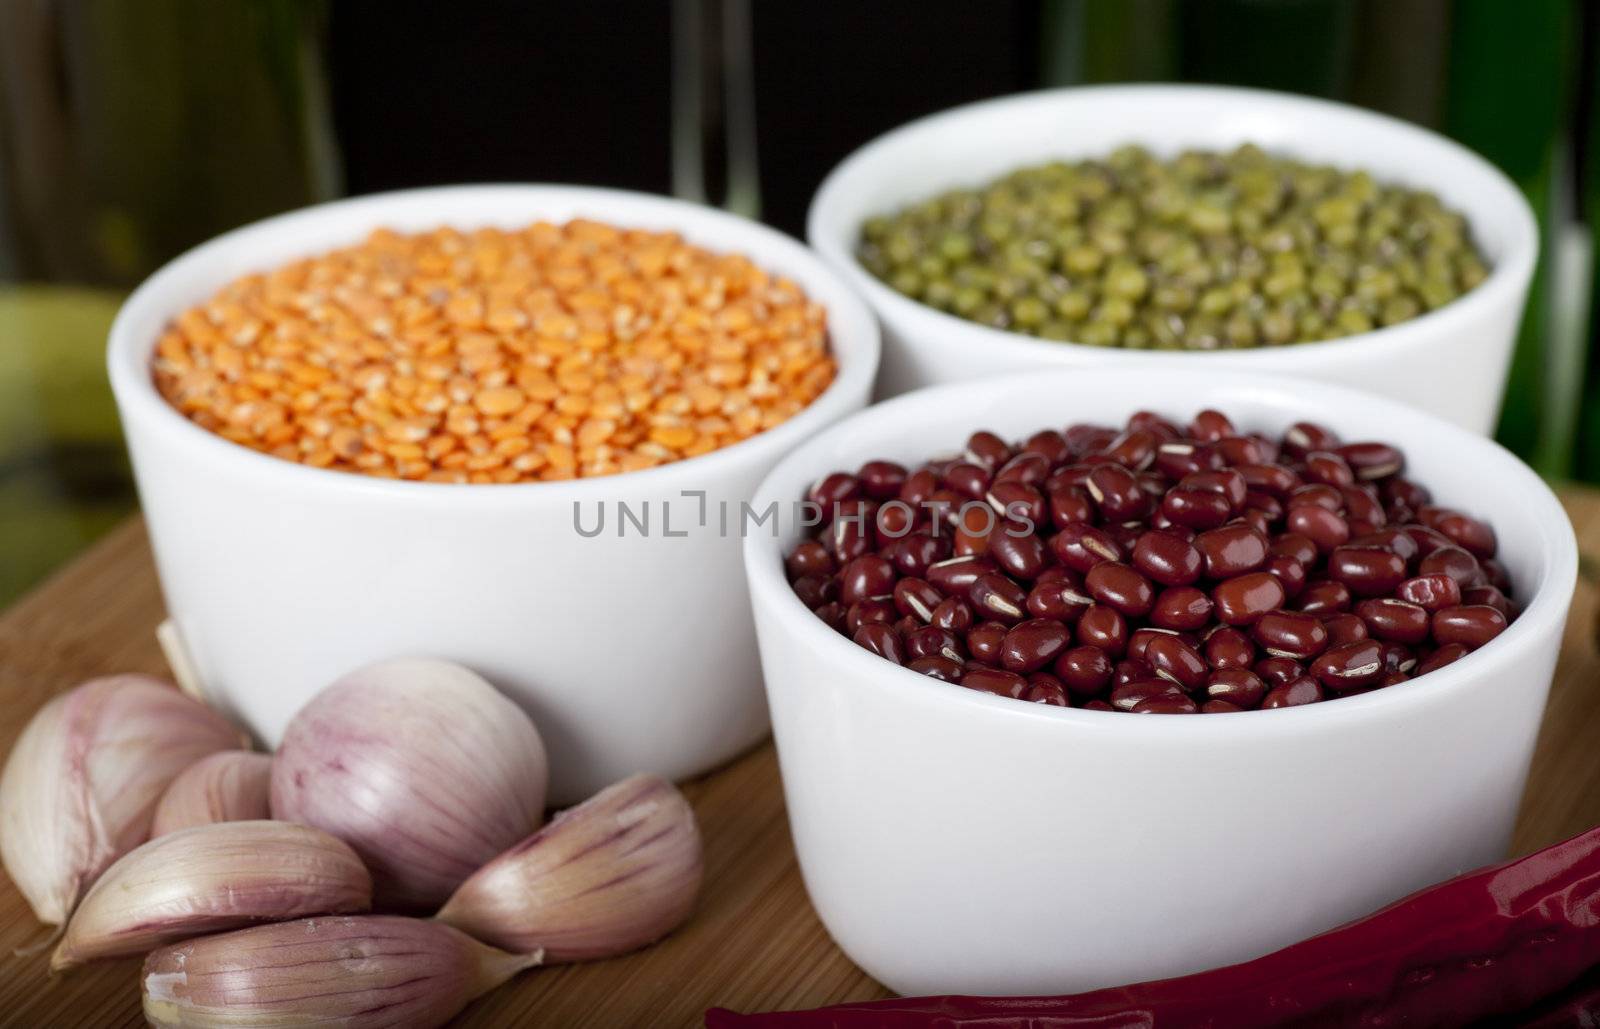 Three types of beans: lentils, mung and azuki, with cloves of garlic.